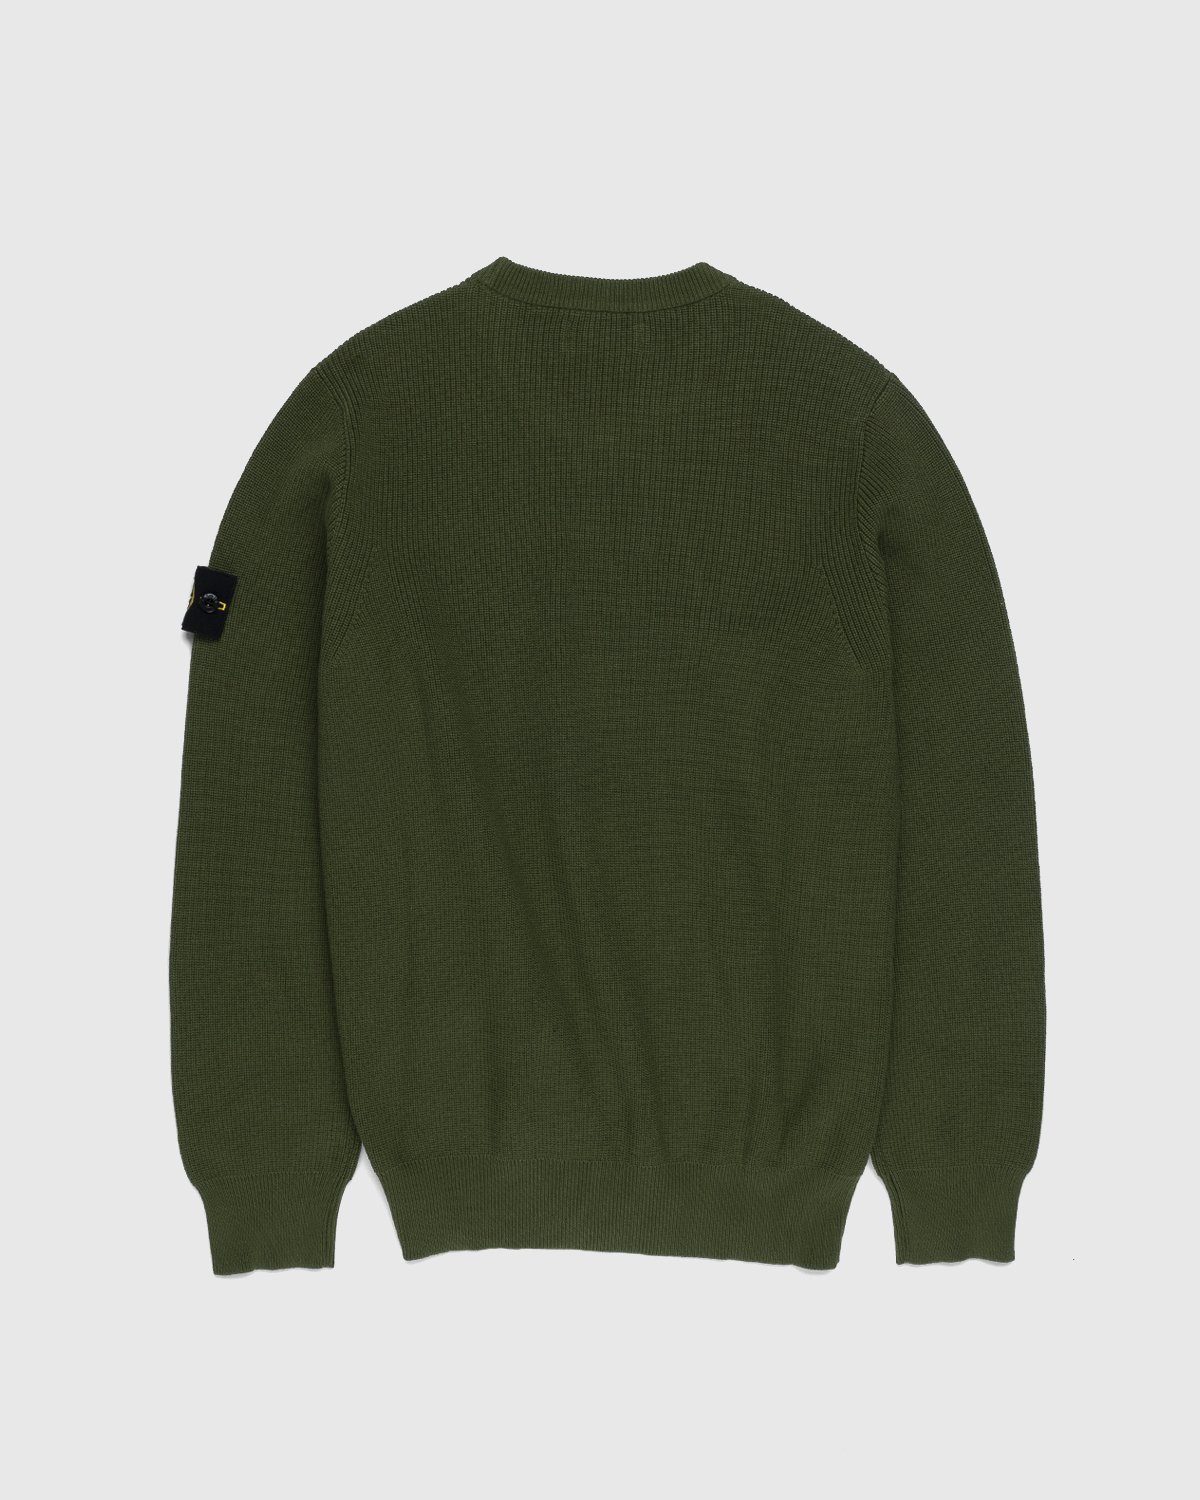 Stone Island - 550D8 Ribbed Soft Cotton Knit Olive - Clothing - Green - Image 2